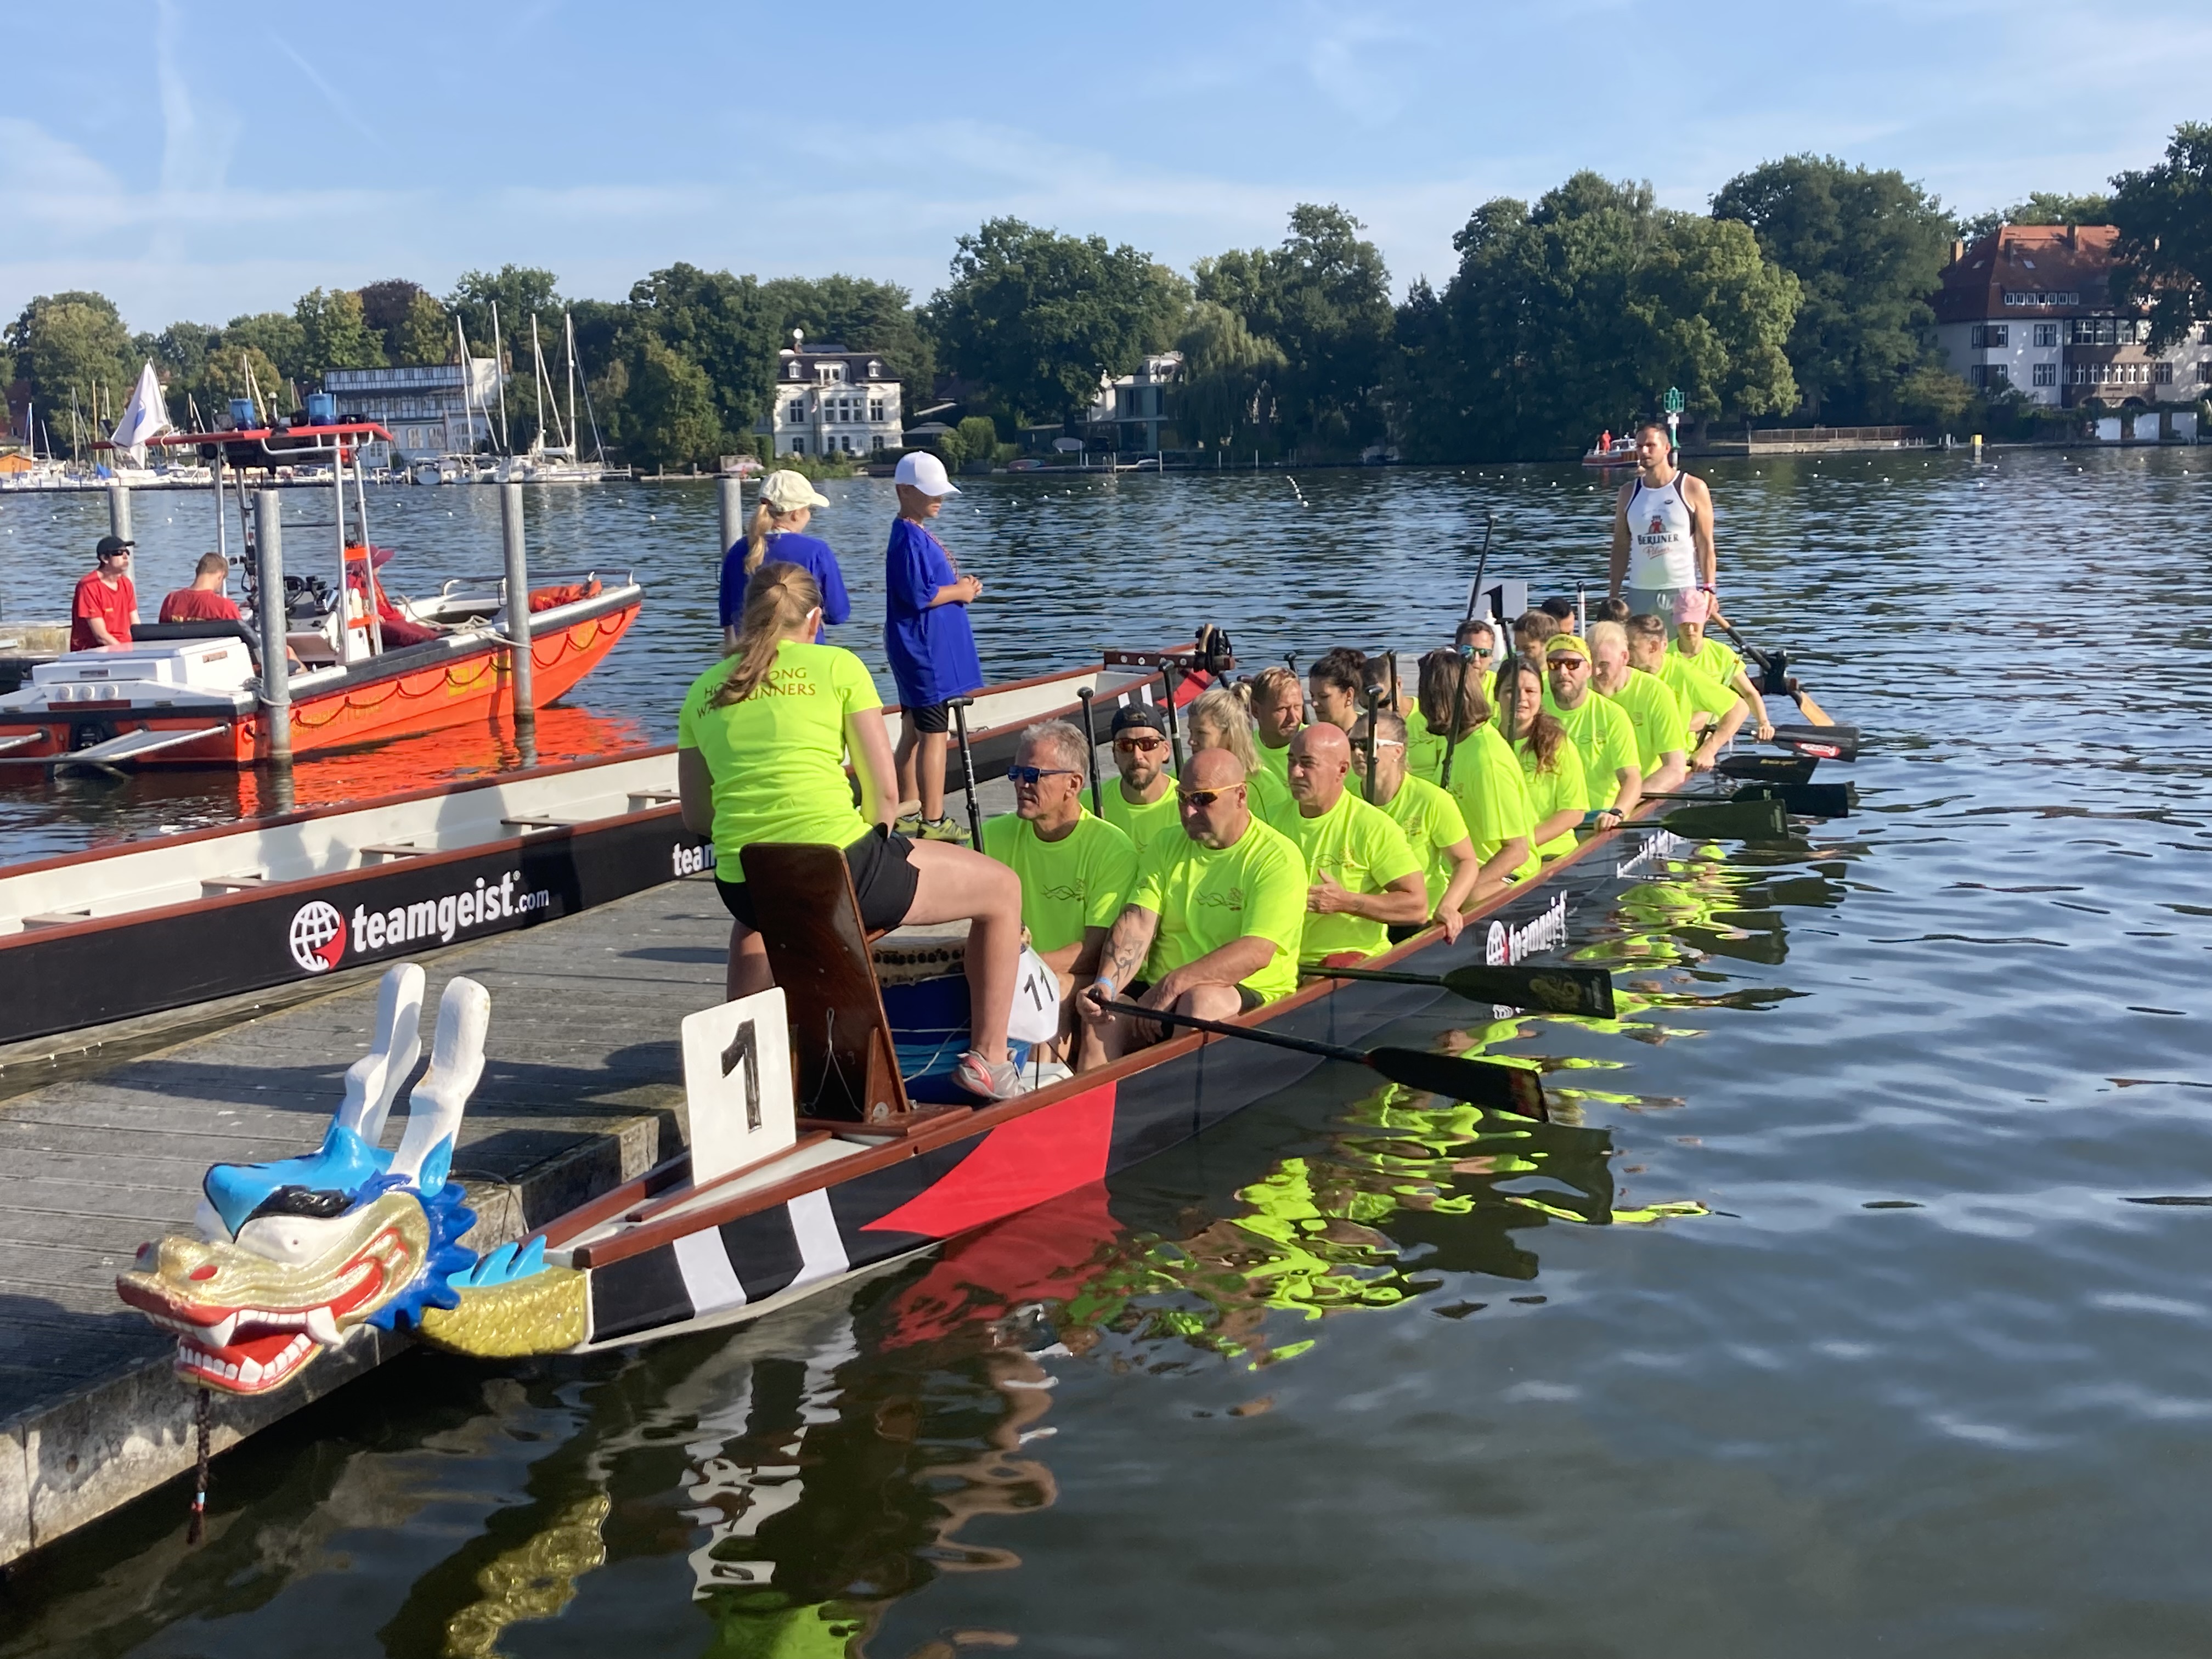 HKETO Berlin sponsored the Berlin CityCup. Photo shows race at the Dragon boat event in Berlin, Germany, on September 9 2023 (Berlin time).